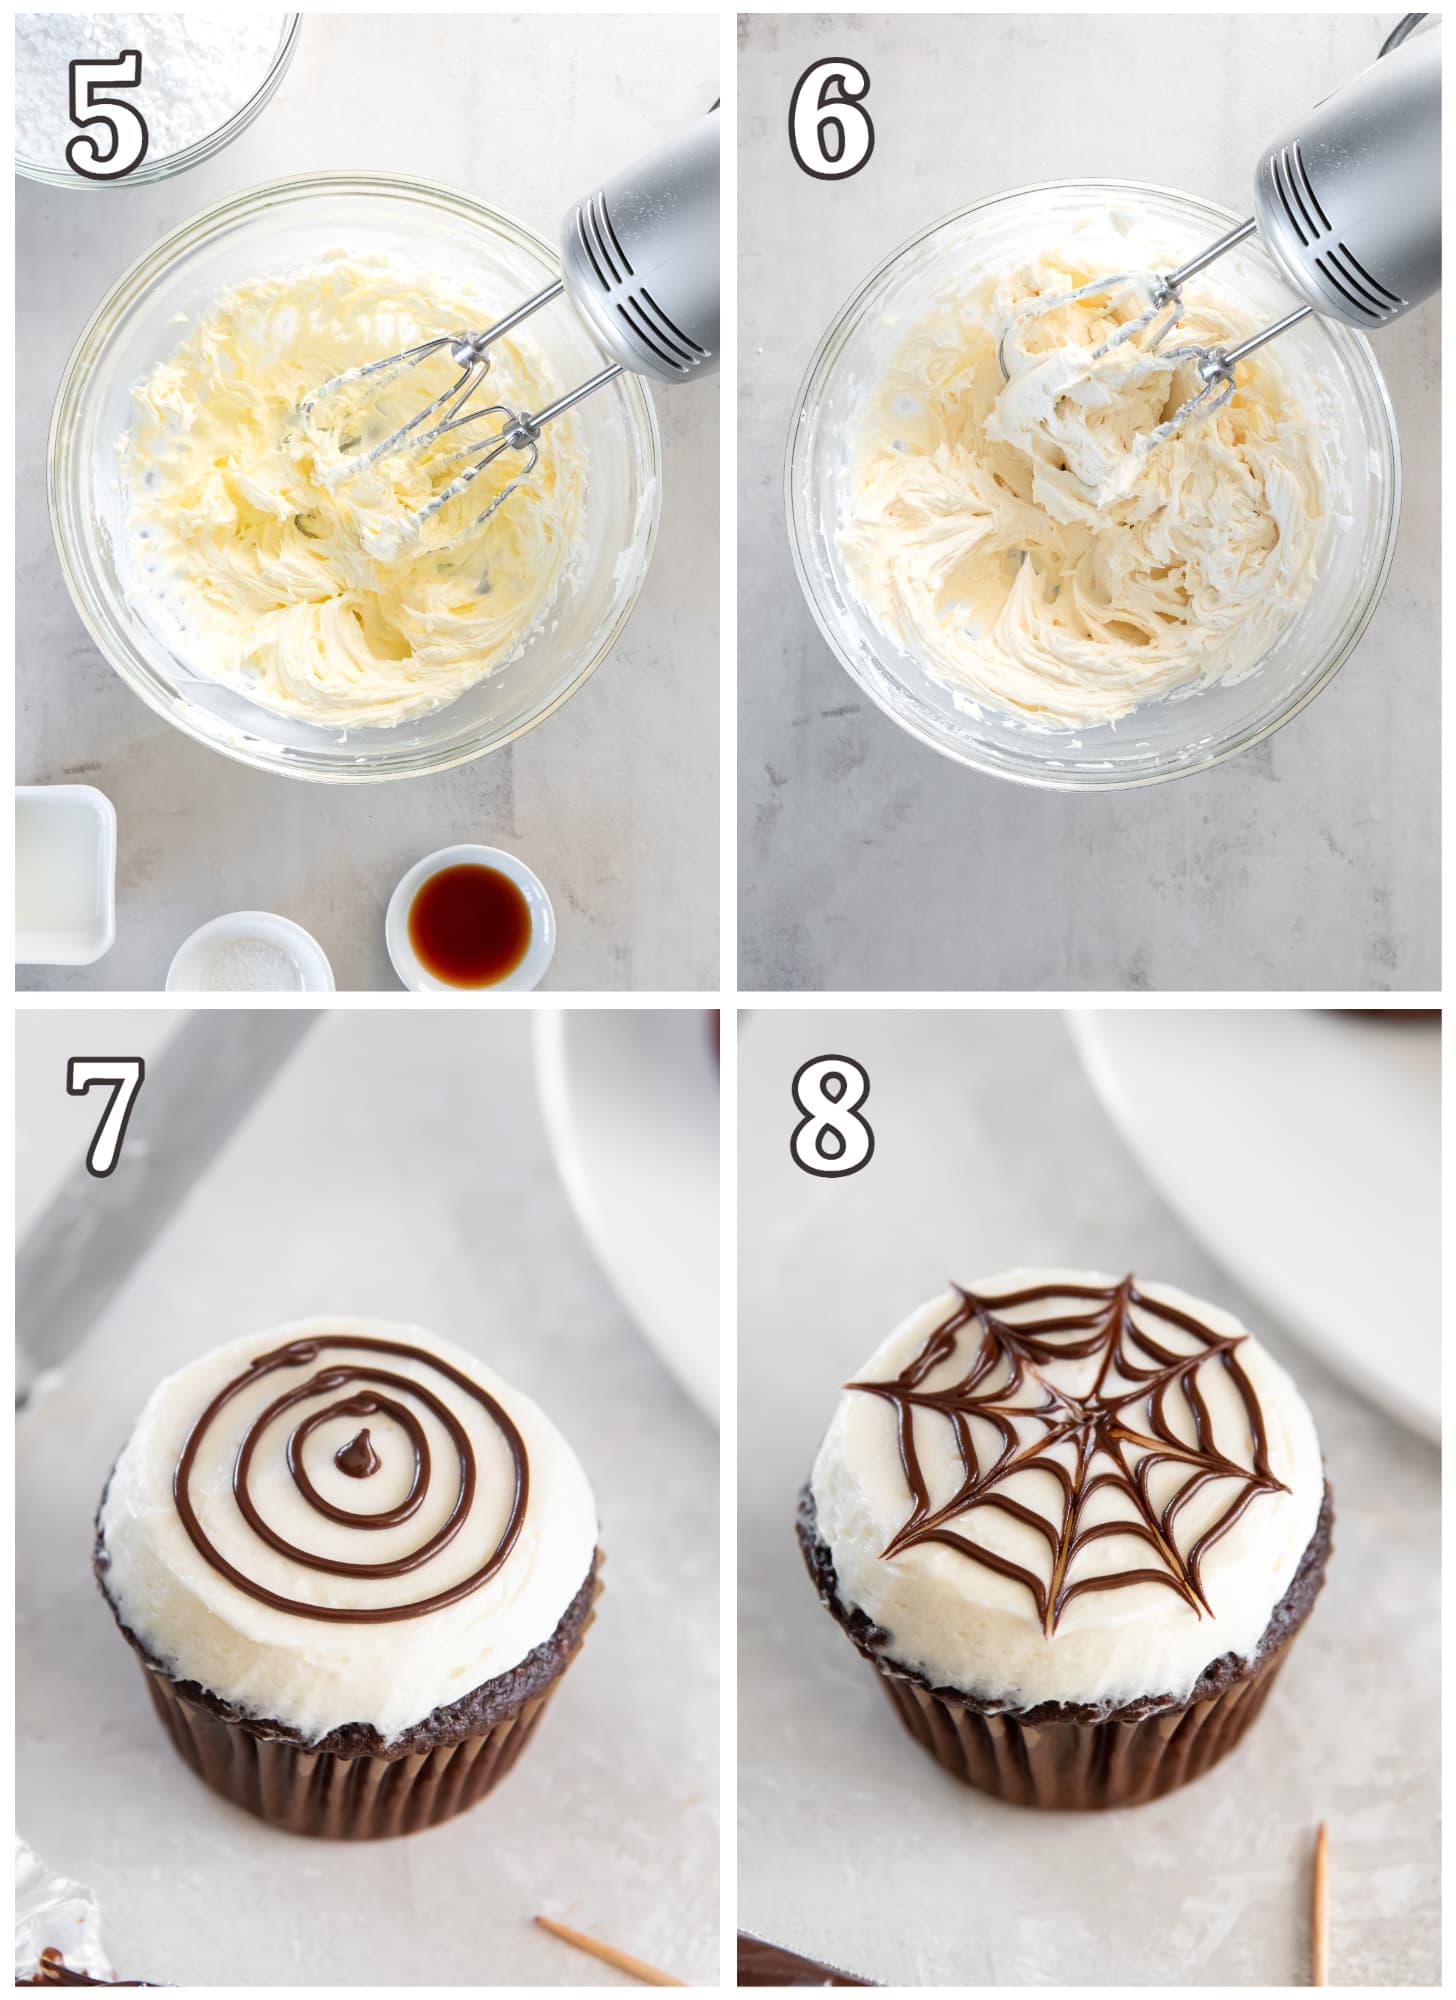 photo collage demonstrating how to decorate halloween cupcakes.